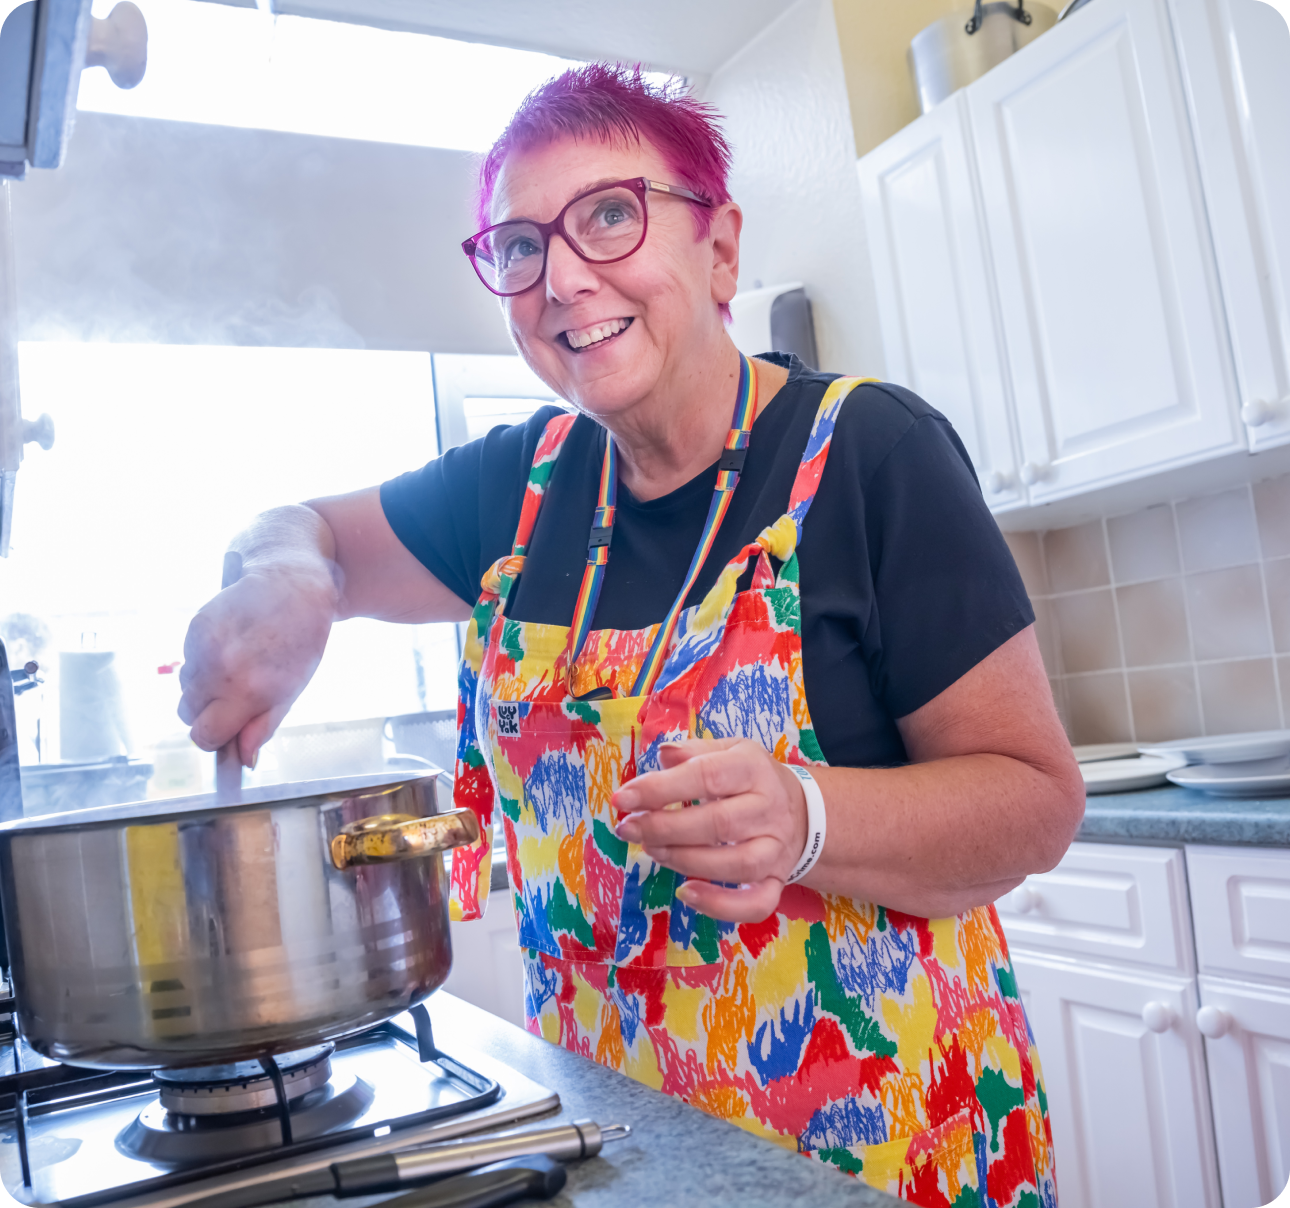 Lady with pink hair and glasses stirring a silver pan on a hob